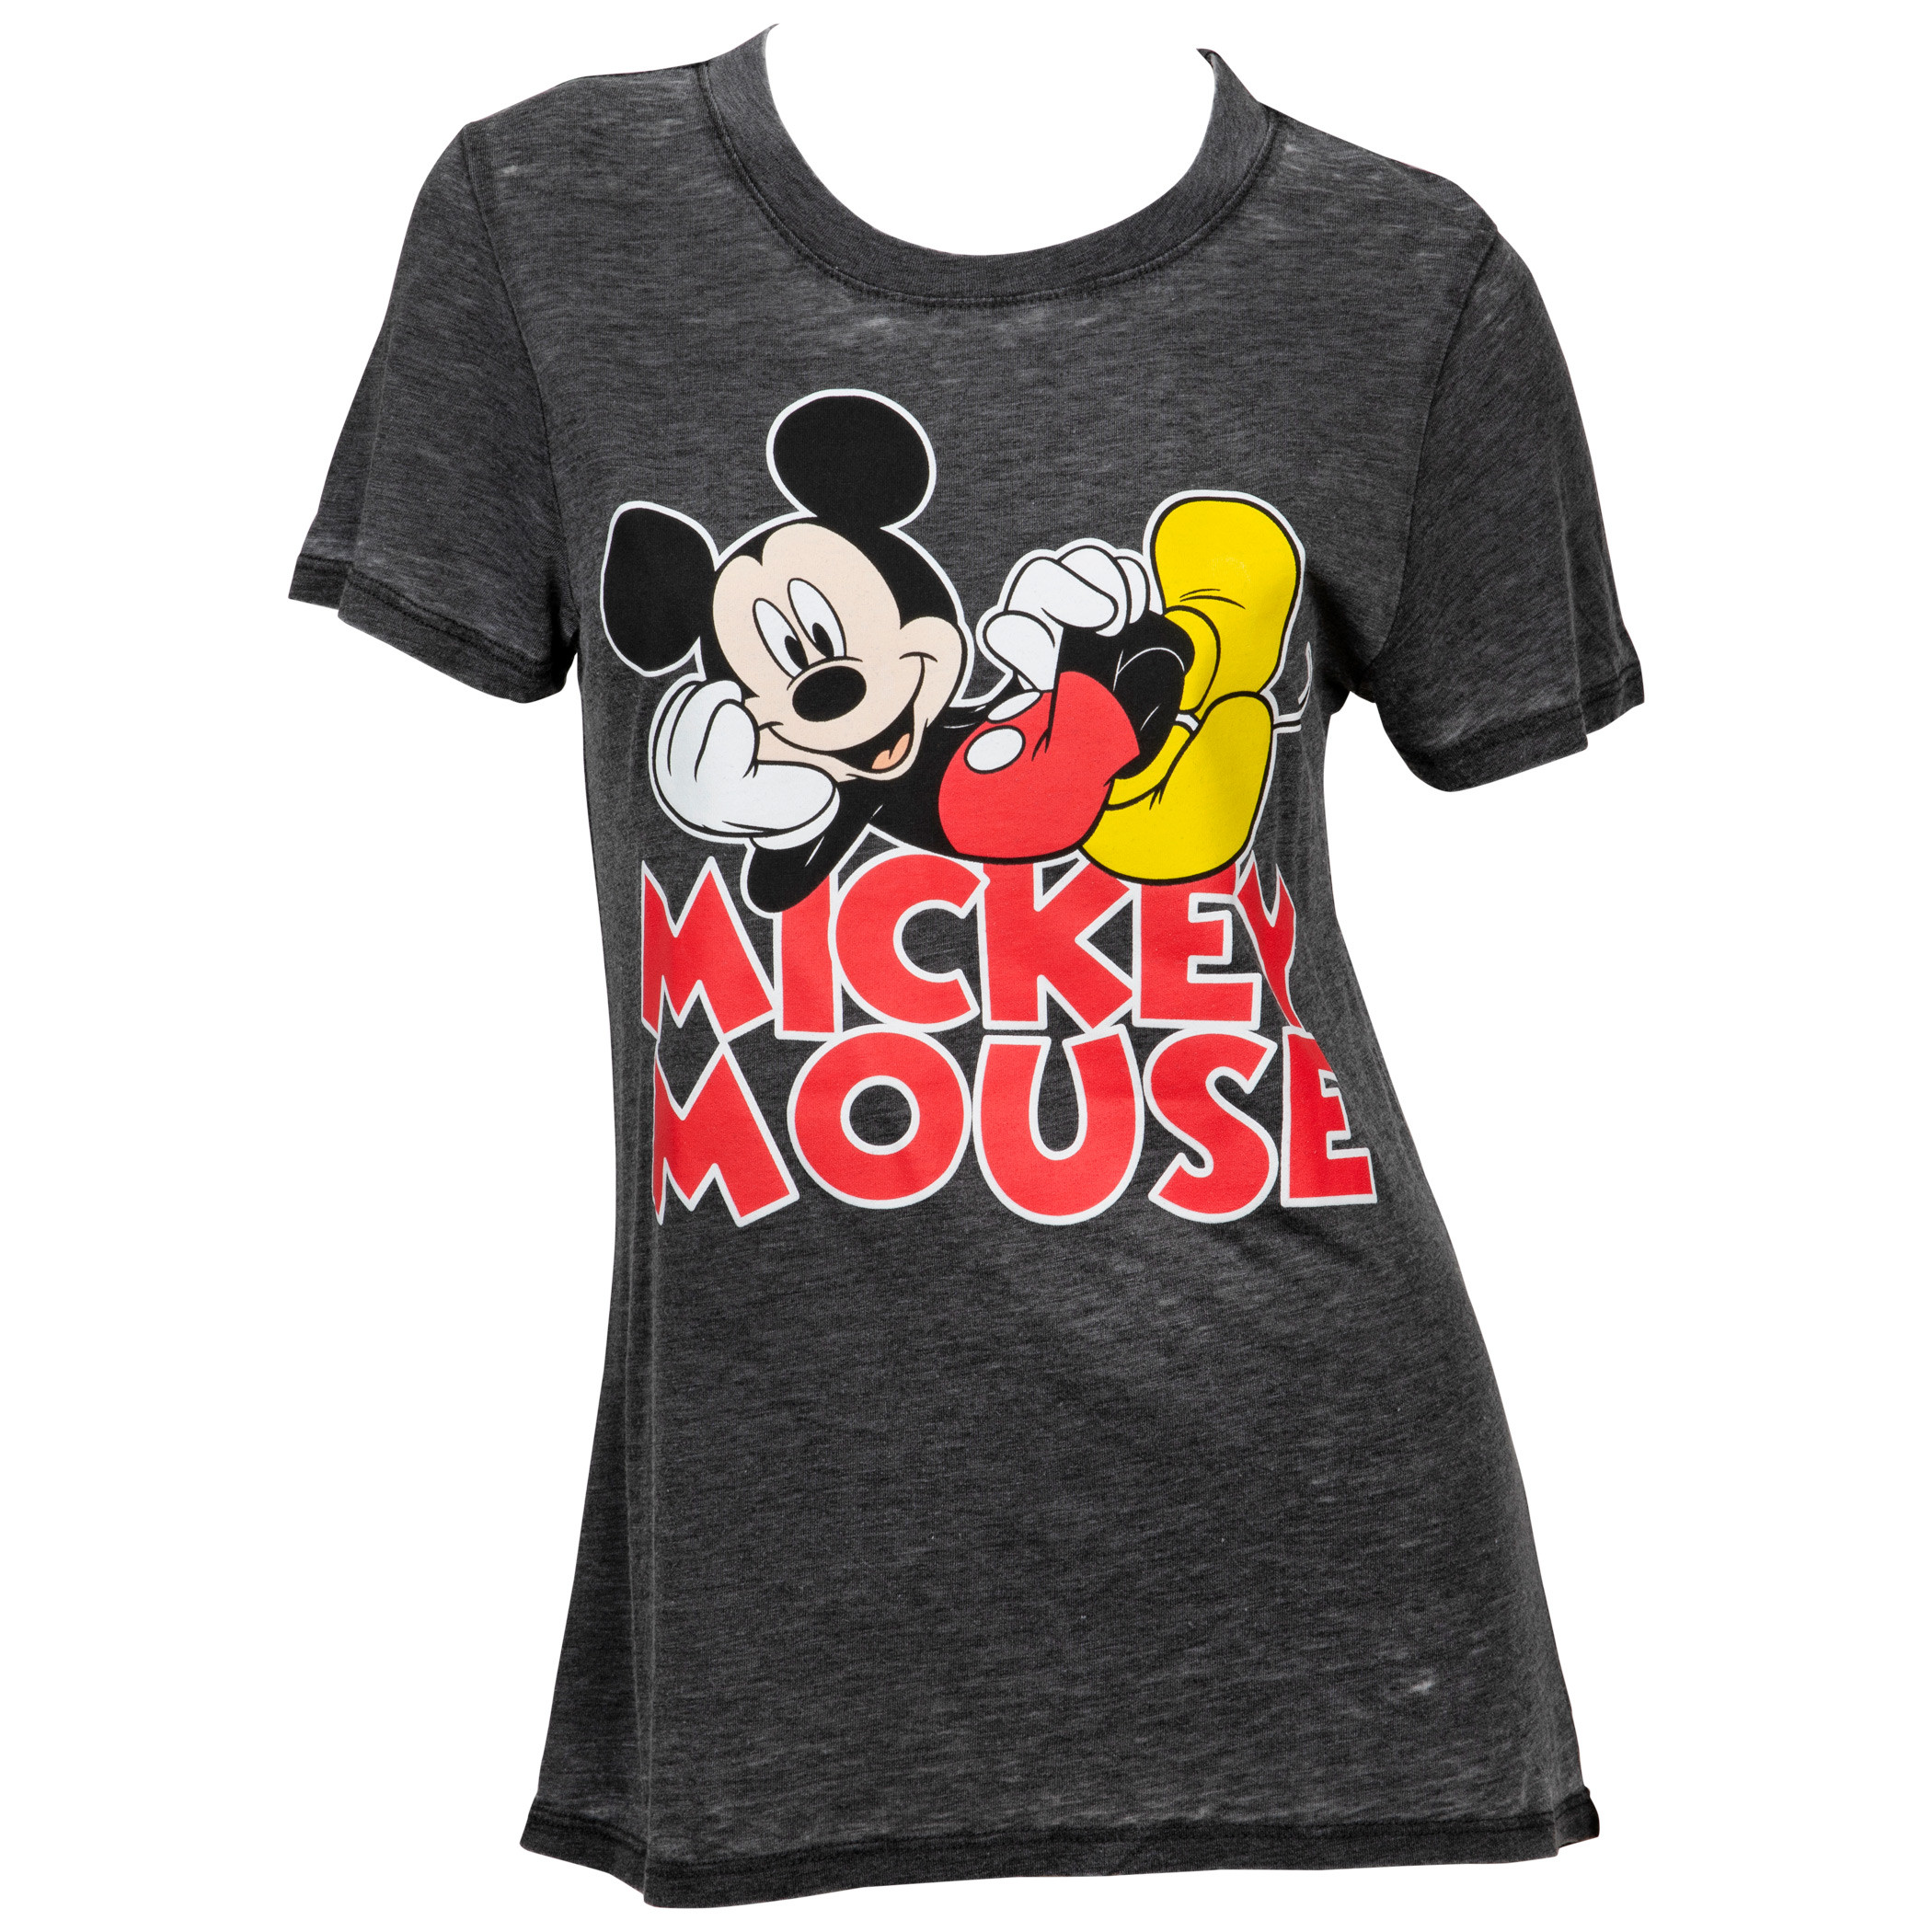 Disney Mickey Mouse Laying On Text Women's Burnout T-Shirt